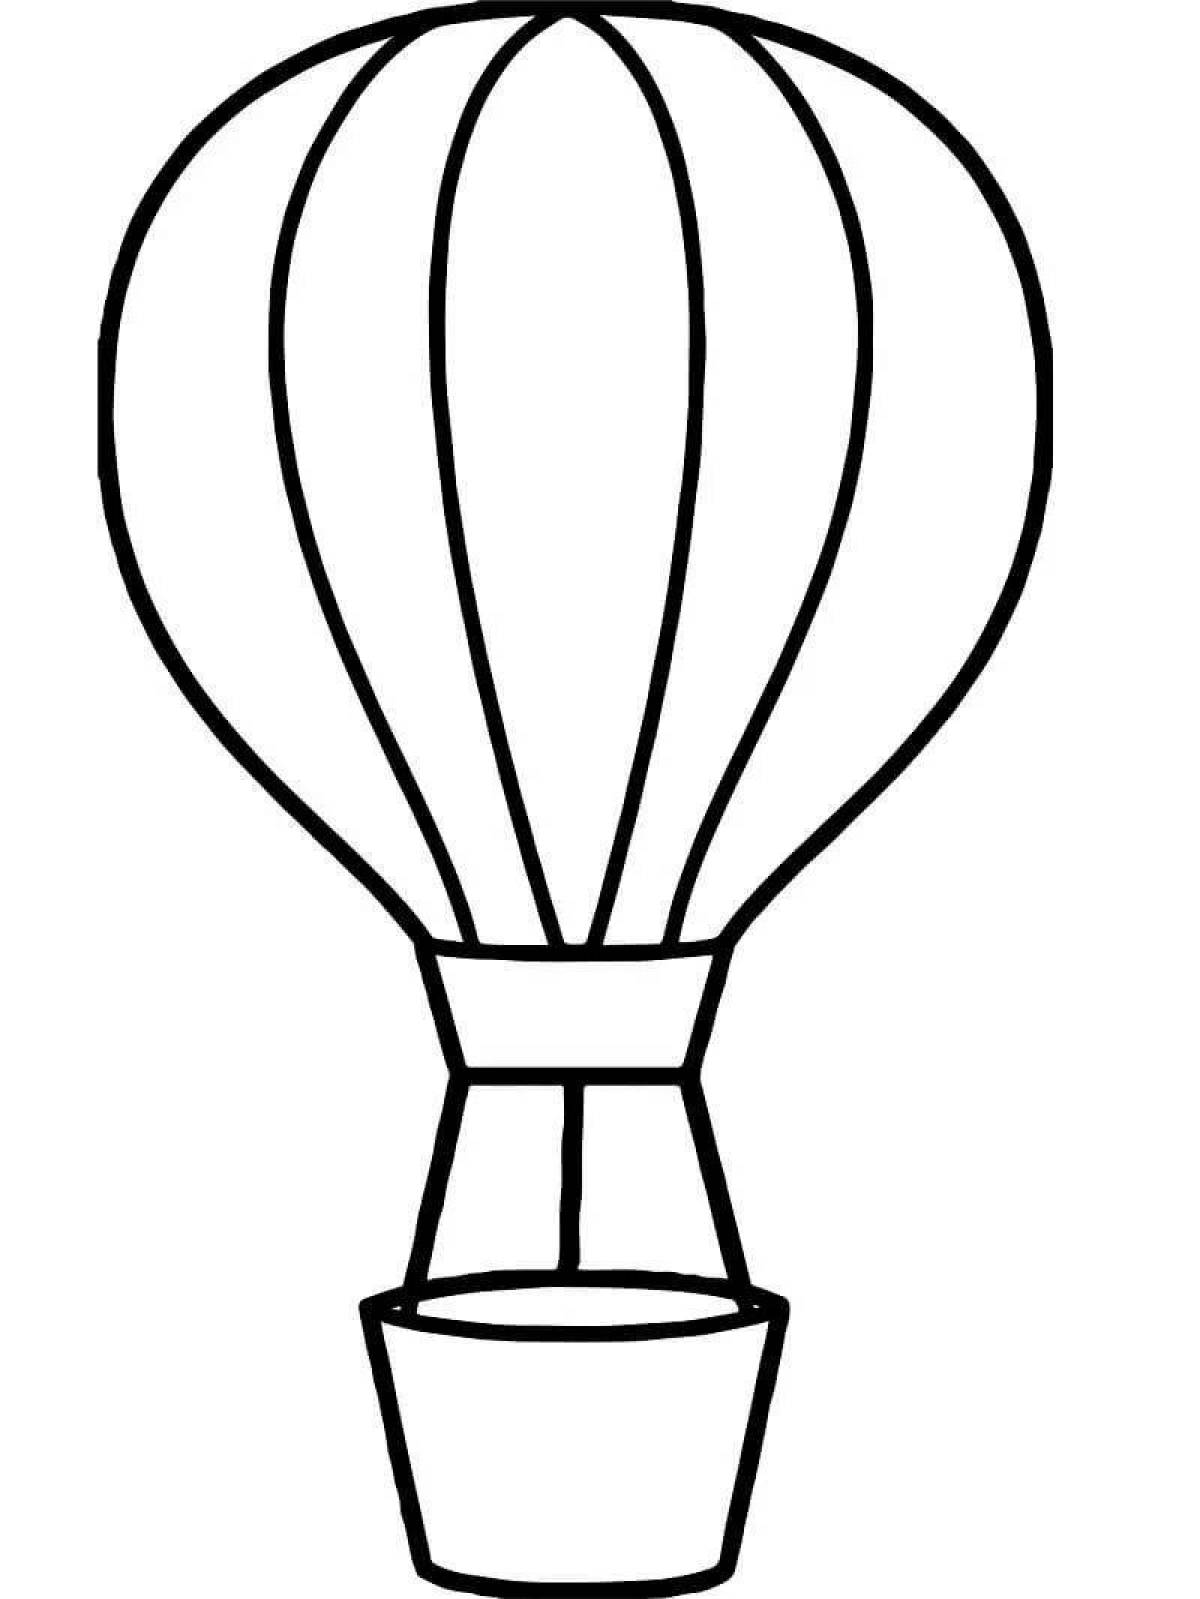 Coloring book shining balloon for kids